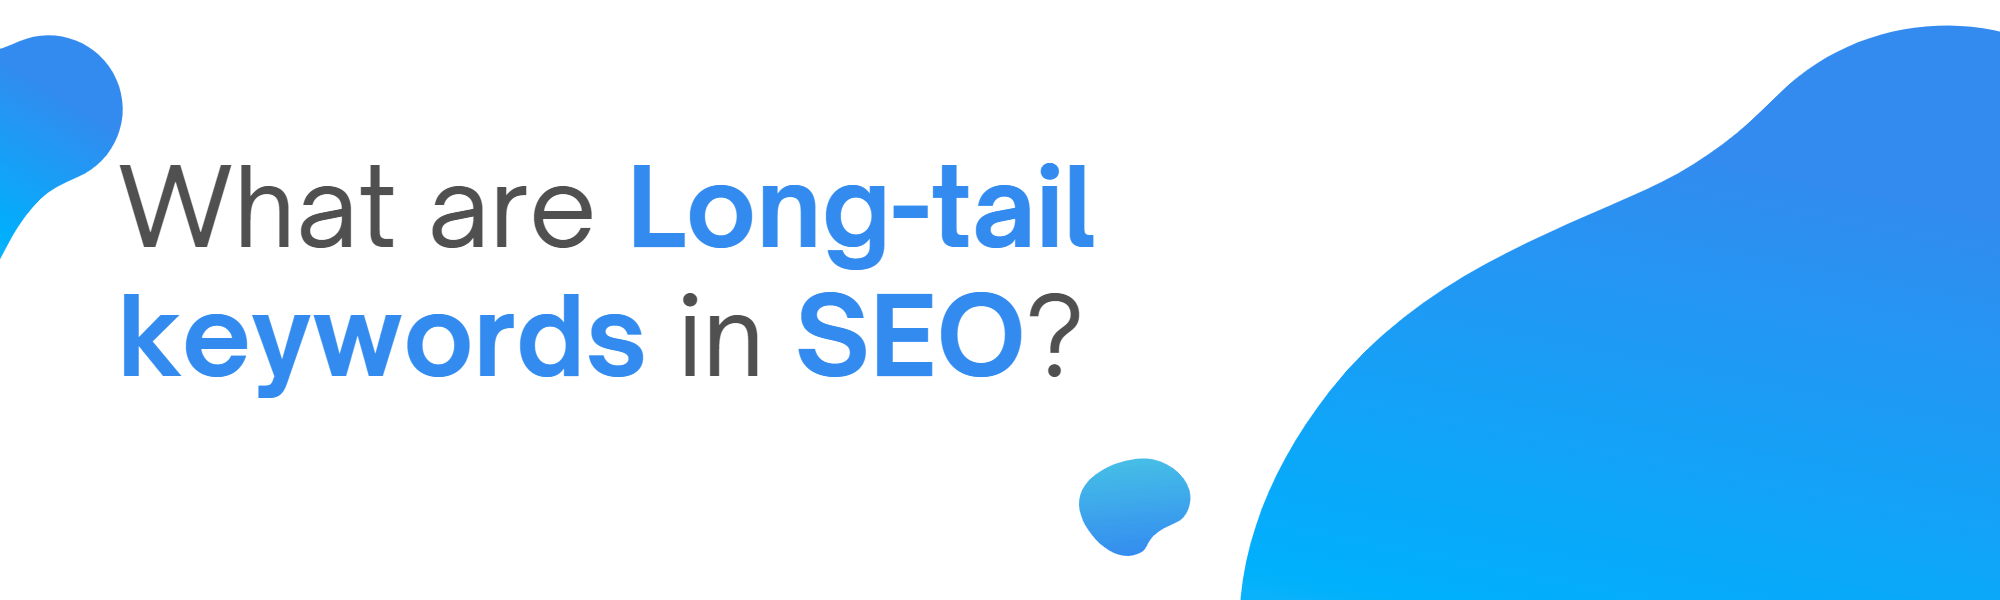 What are Long-tail keywords in SEO?